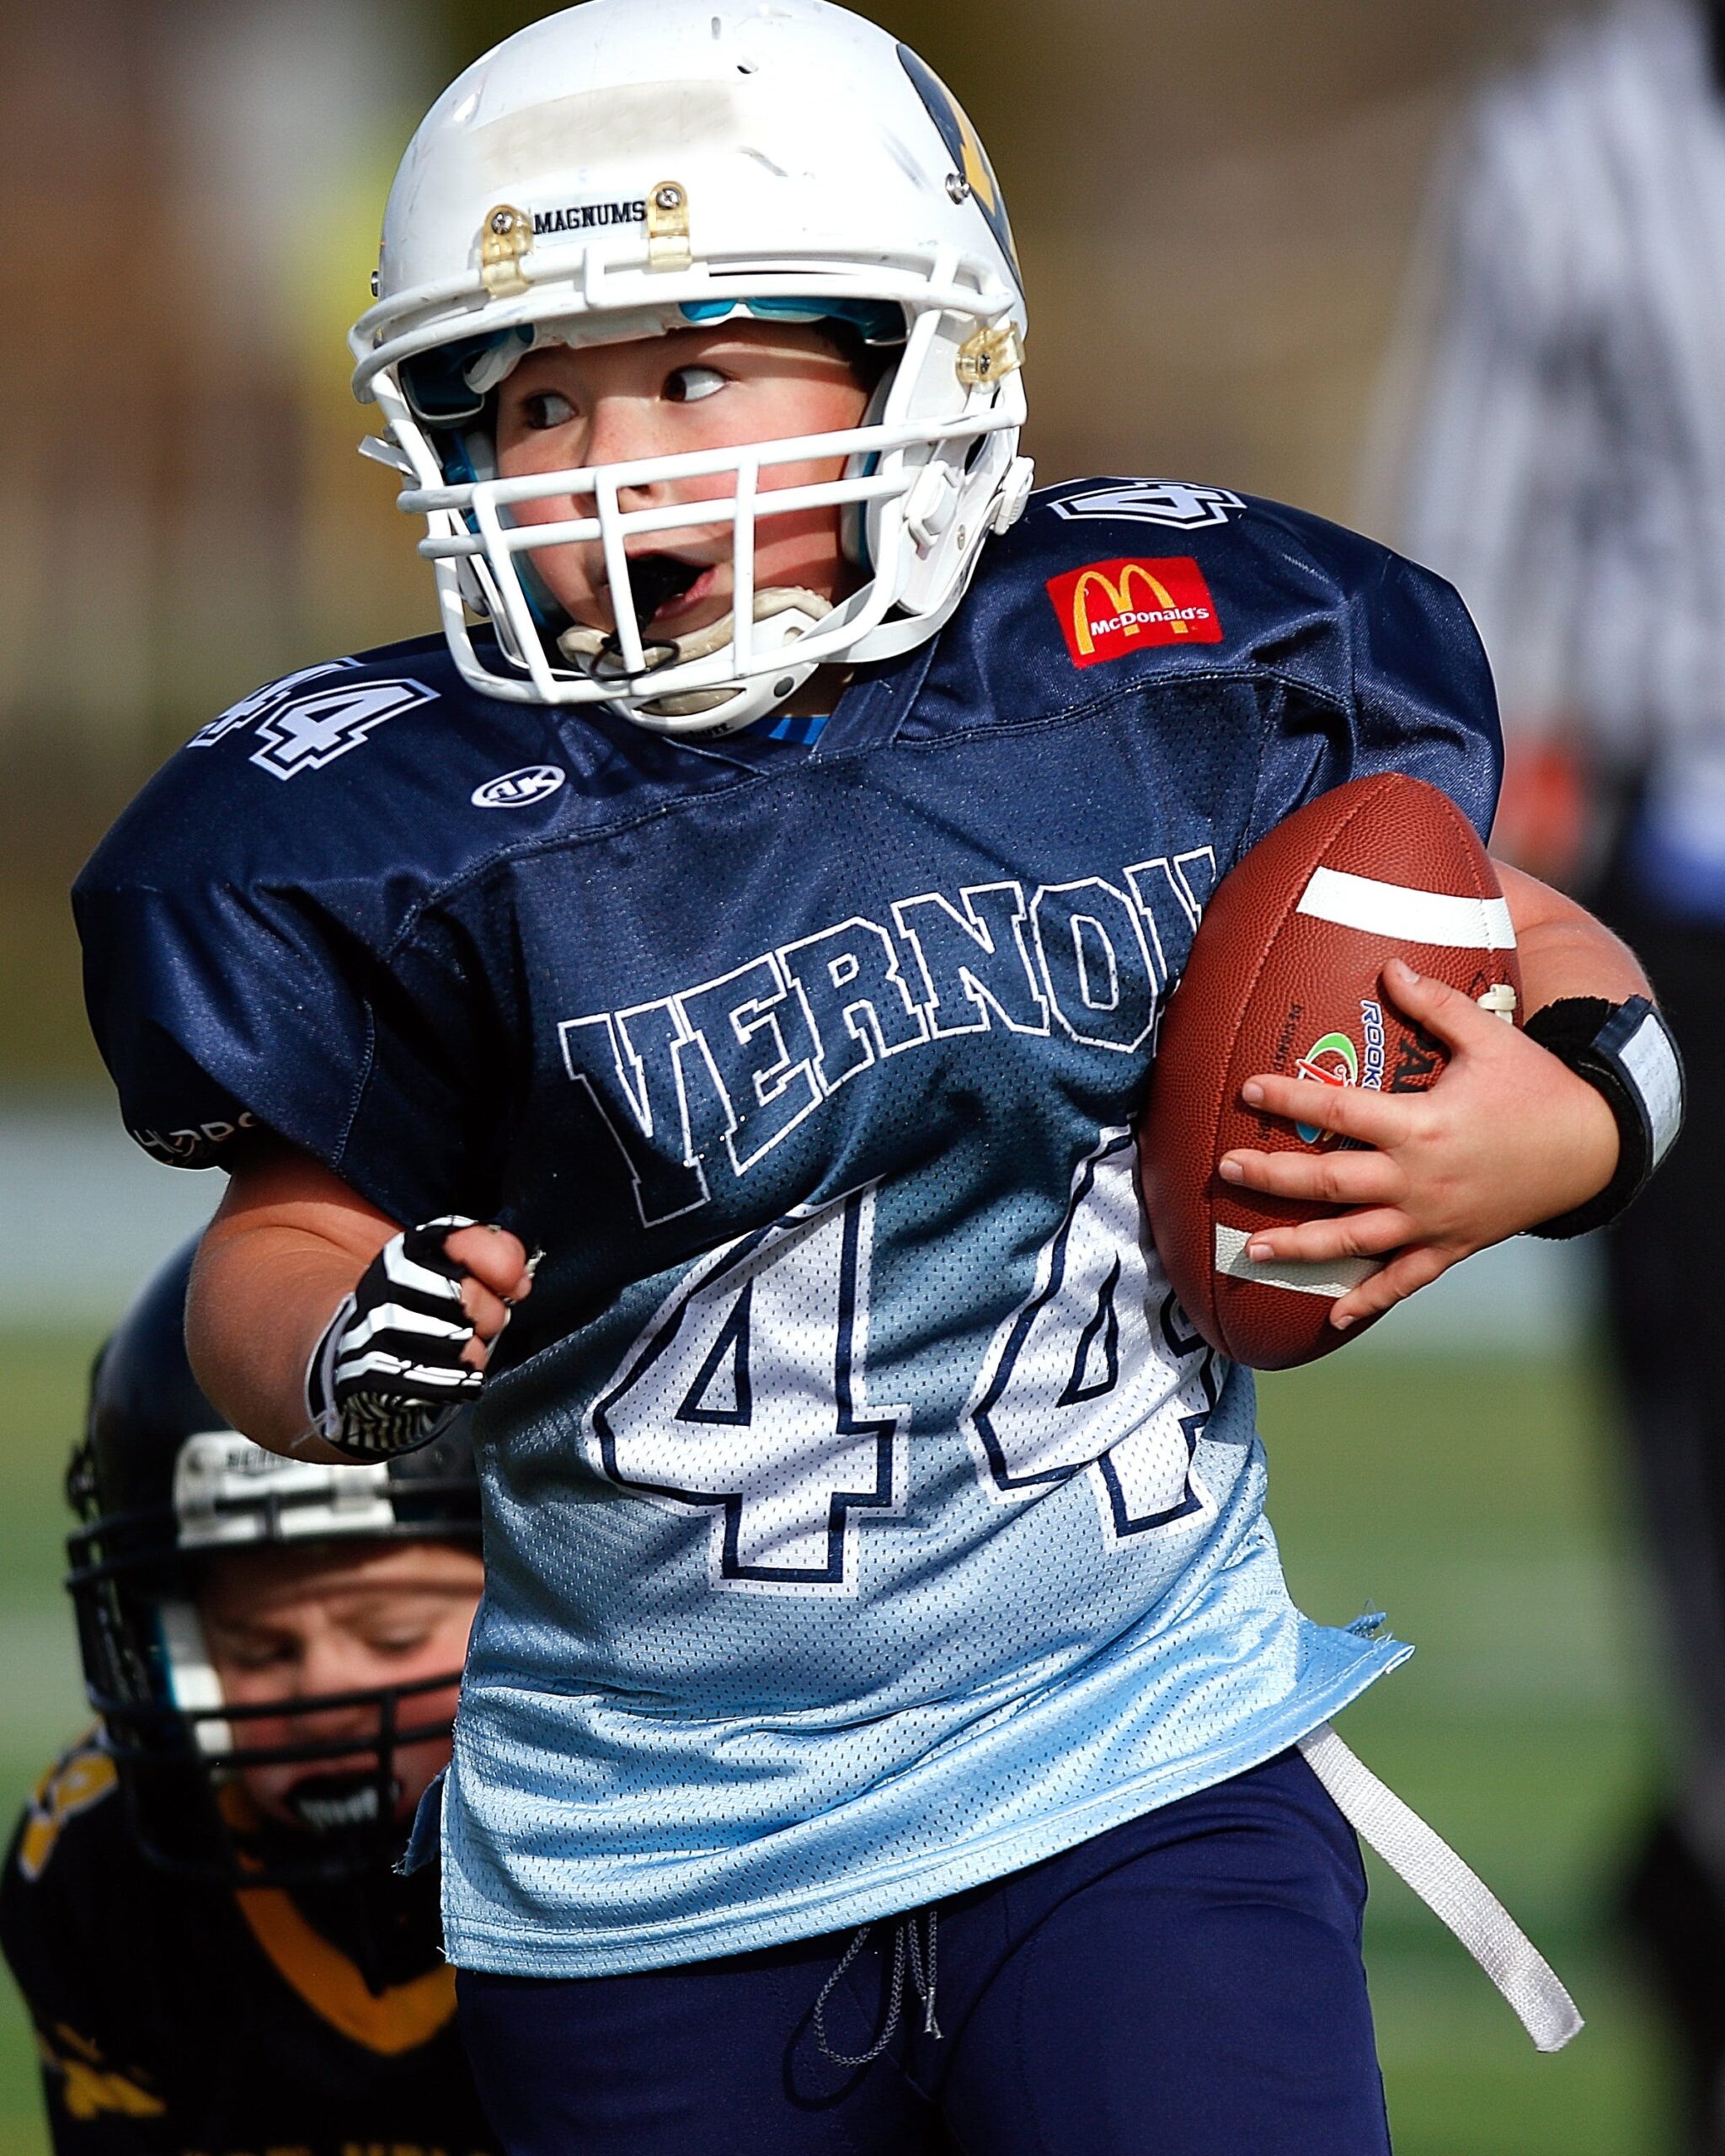 A child in a navy blue football jersey and a white helmet running with a football, looking ahead attentively during a game